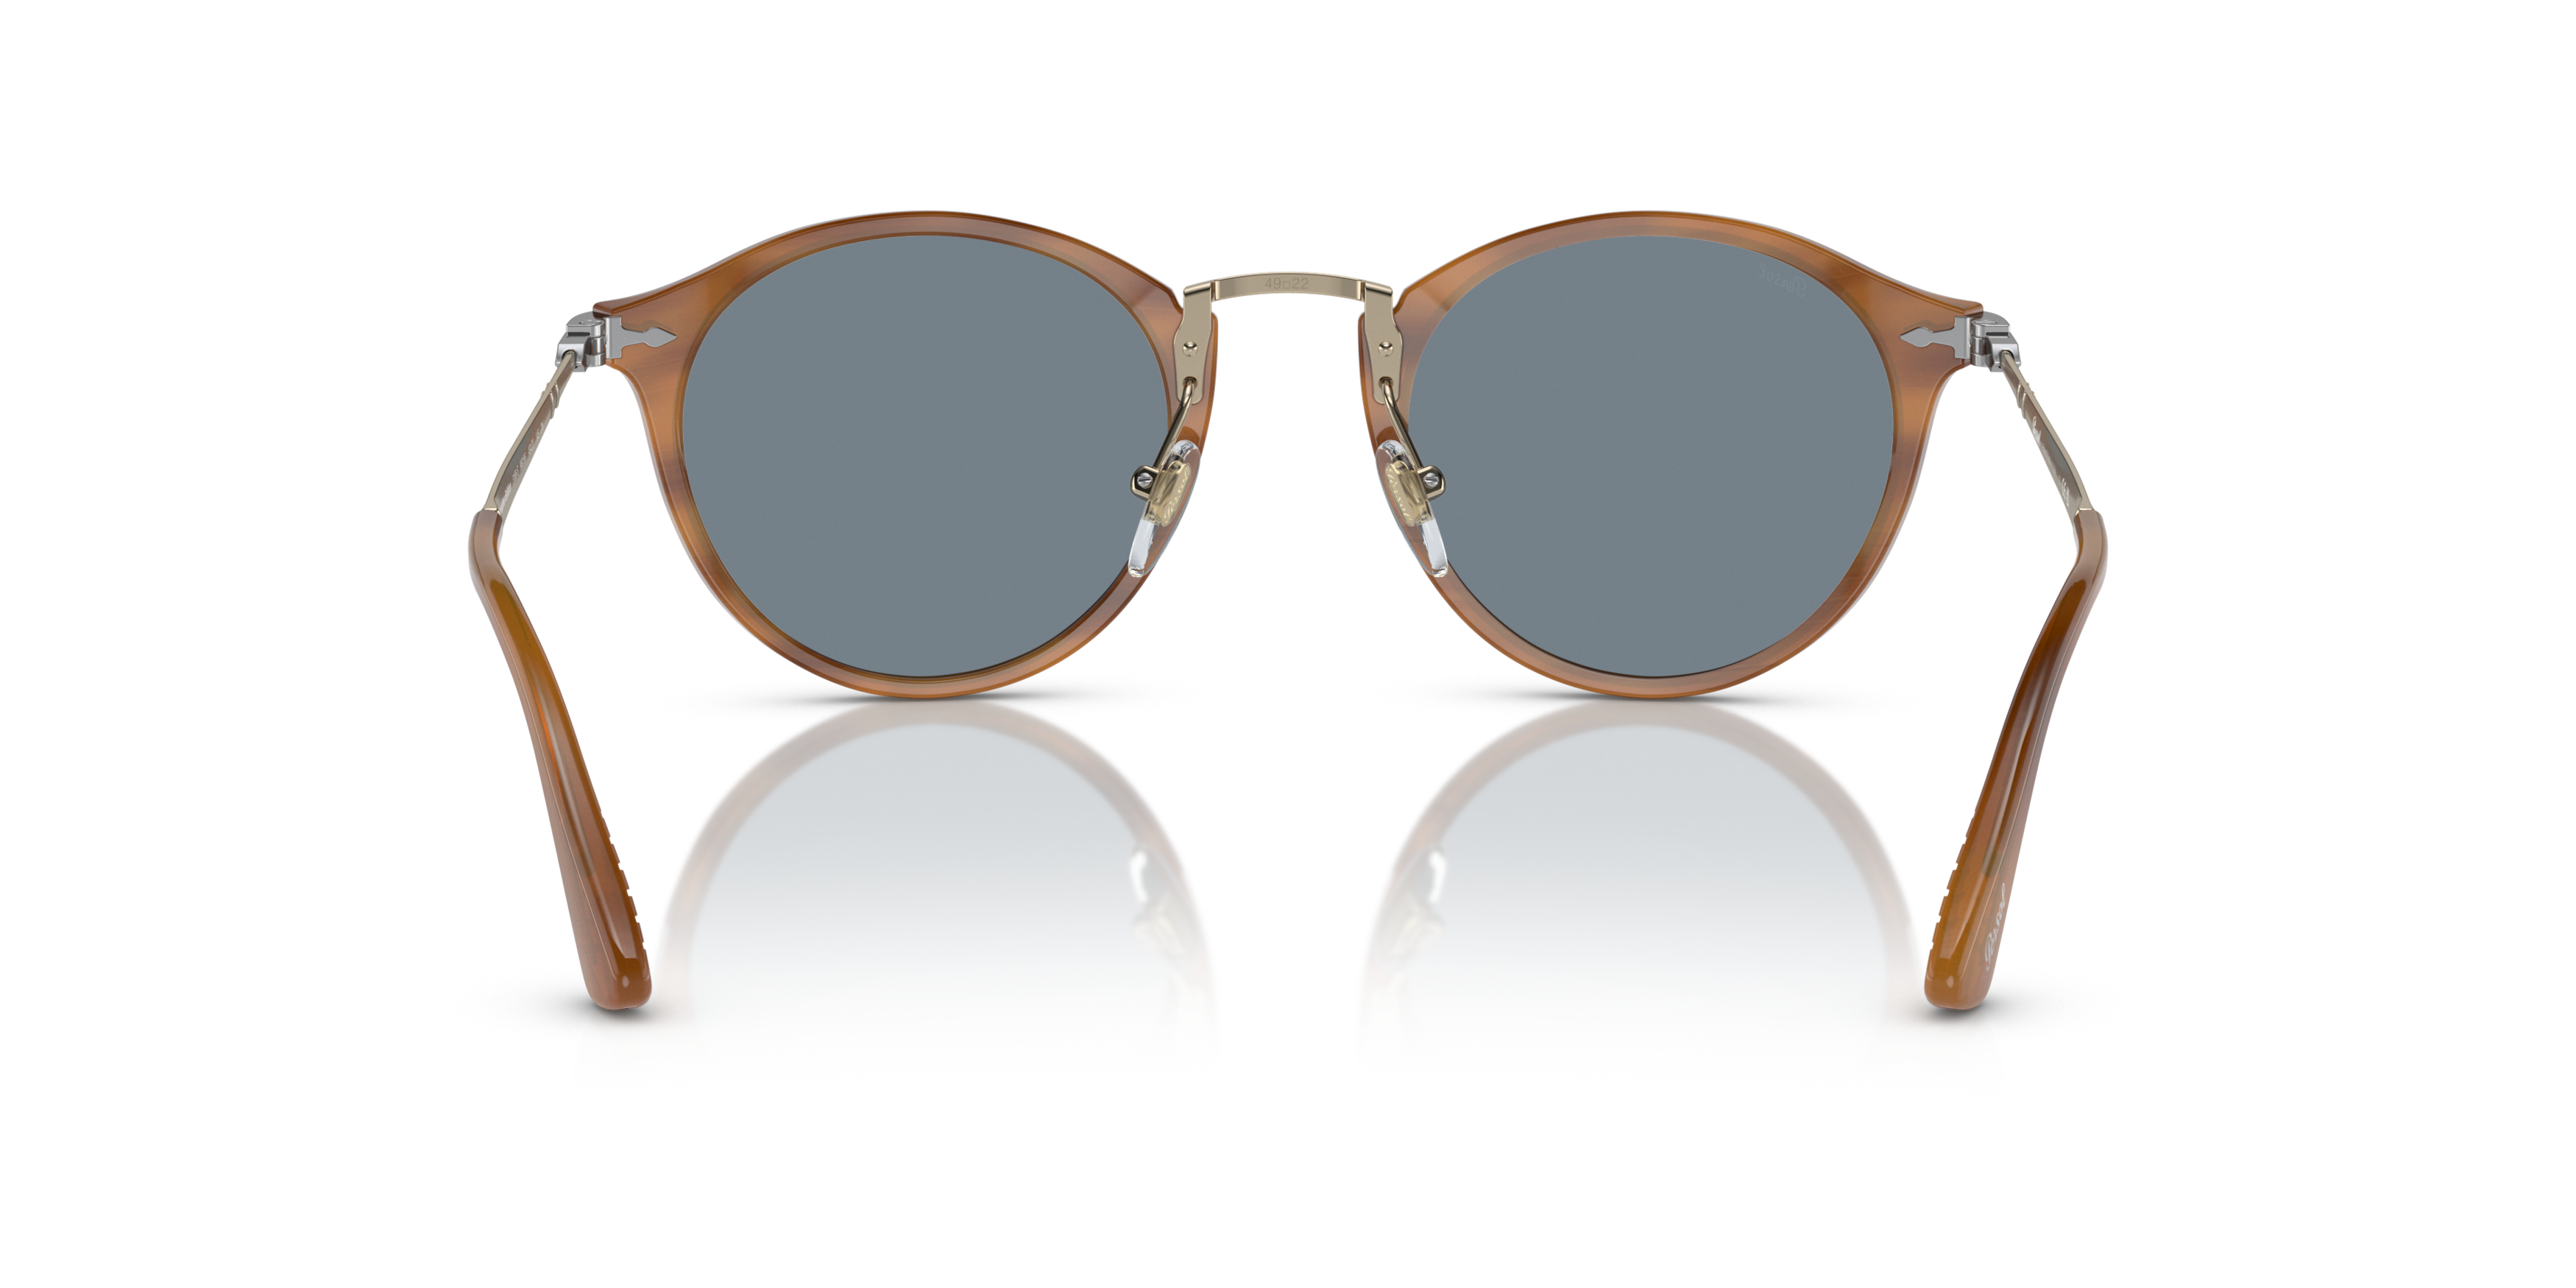 [products.image.detail02] Persol 0PO3166S 960/56